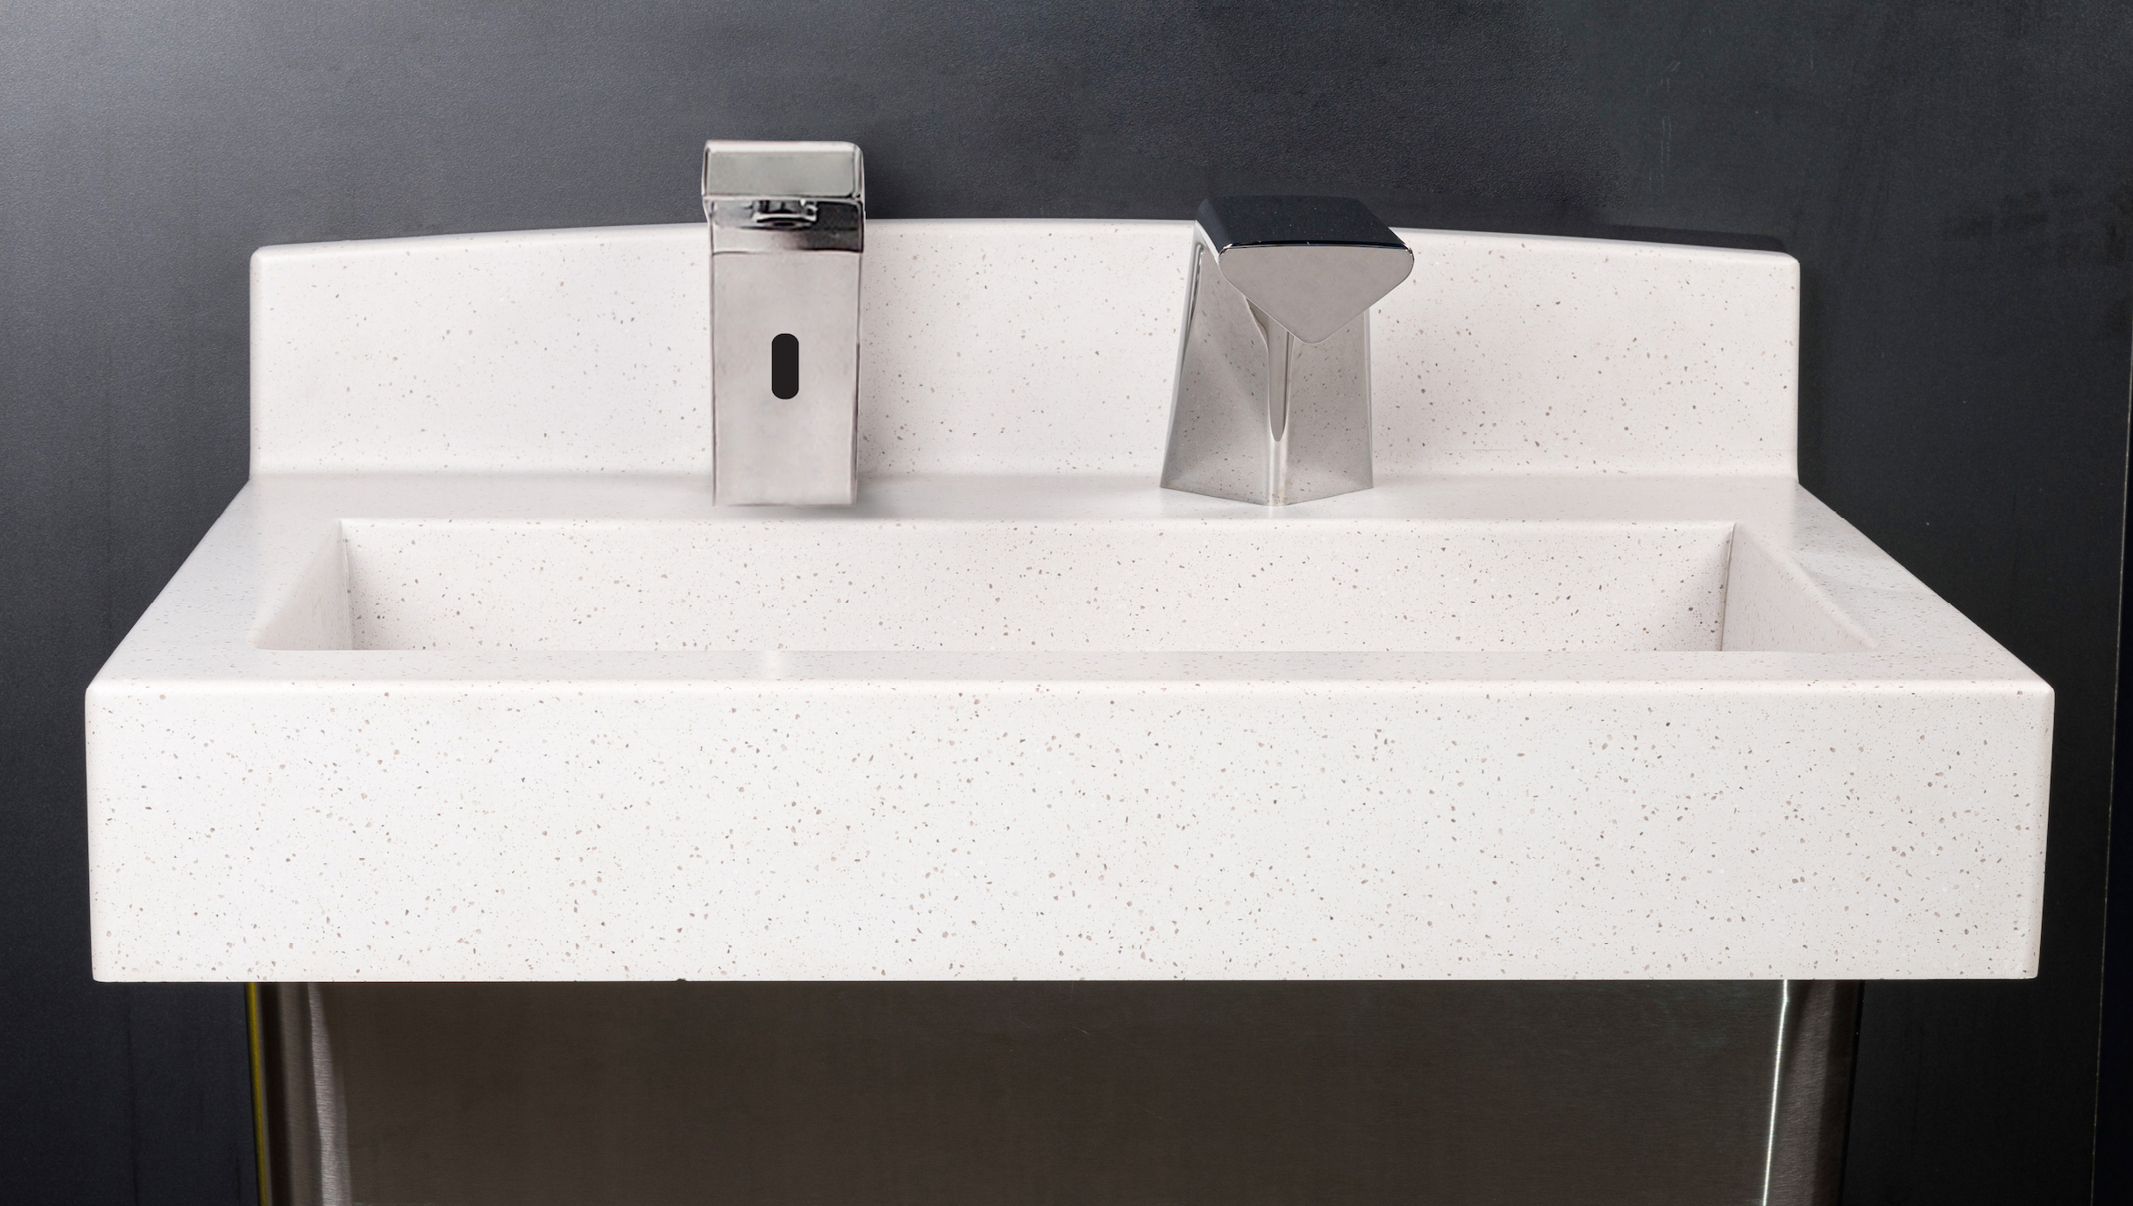 Introducing D|COR: Simplifying All-in-One Sink Systems for Commercial Restrooms